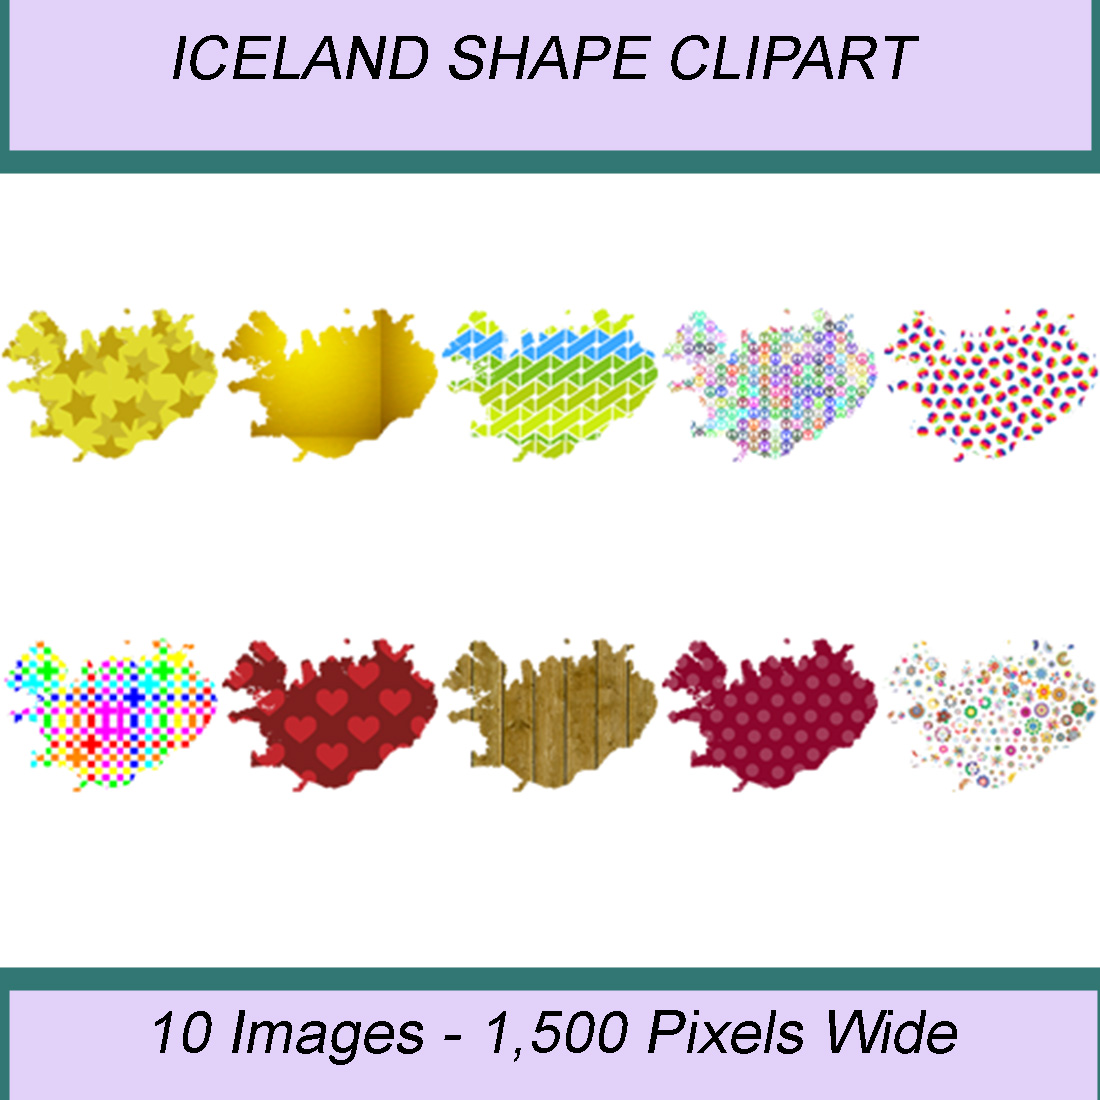 ICELAND SHAPE CLIPART ICONS cover image.